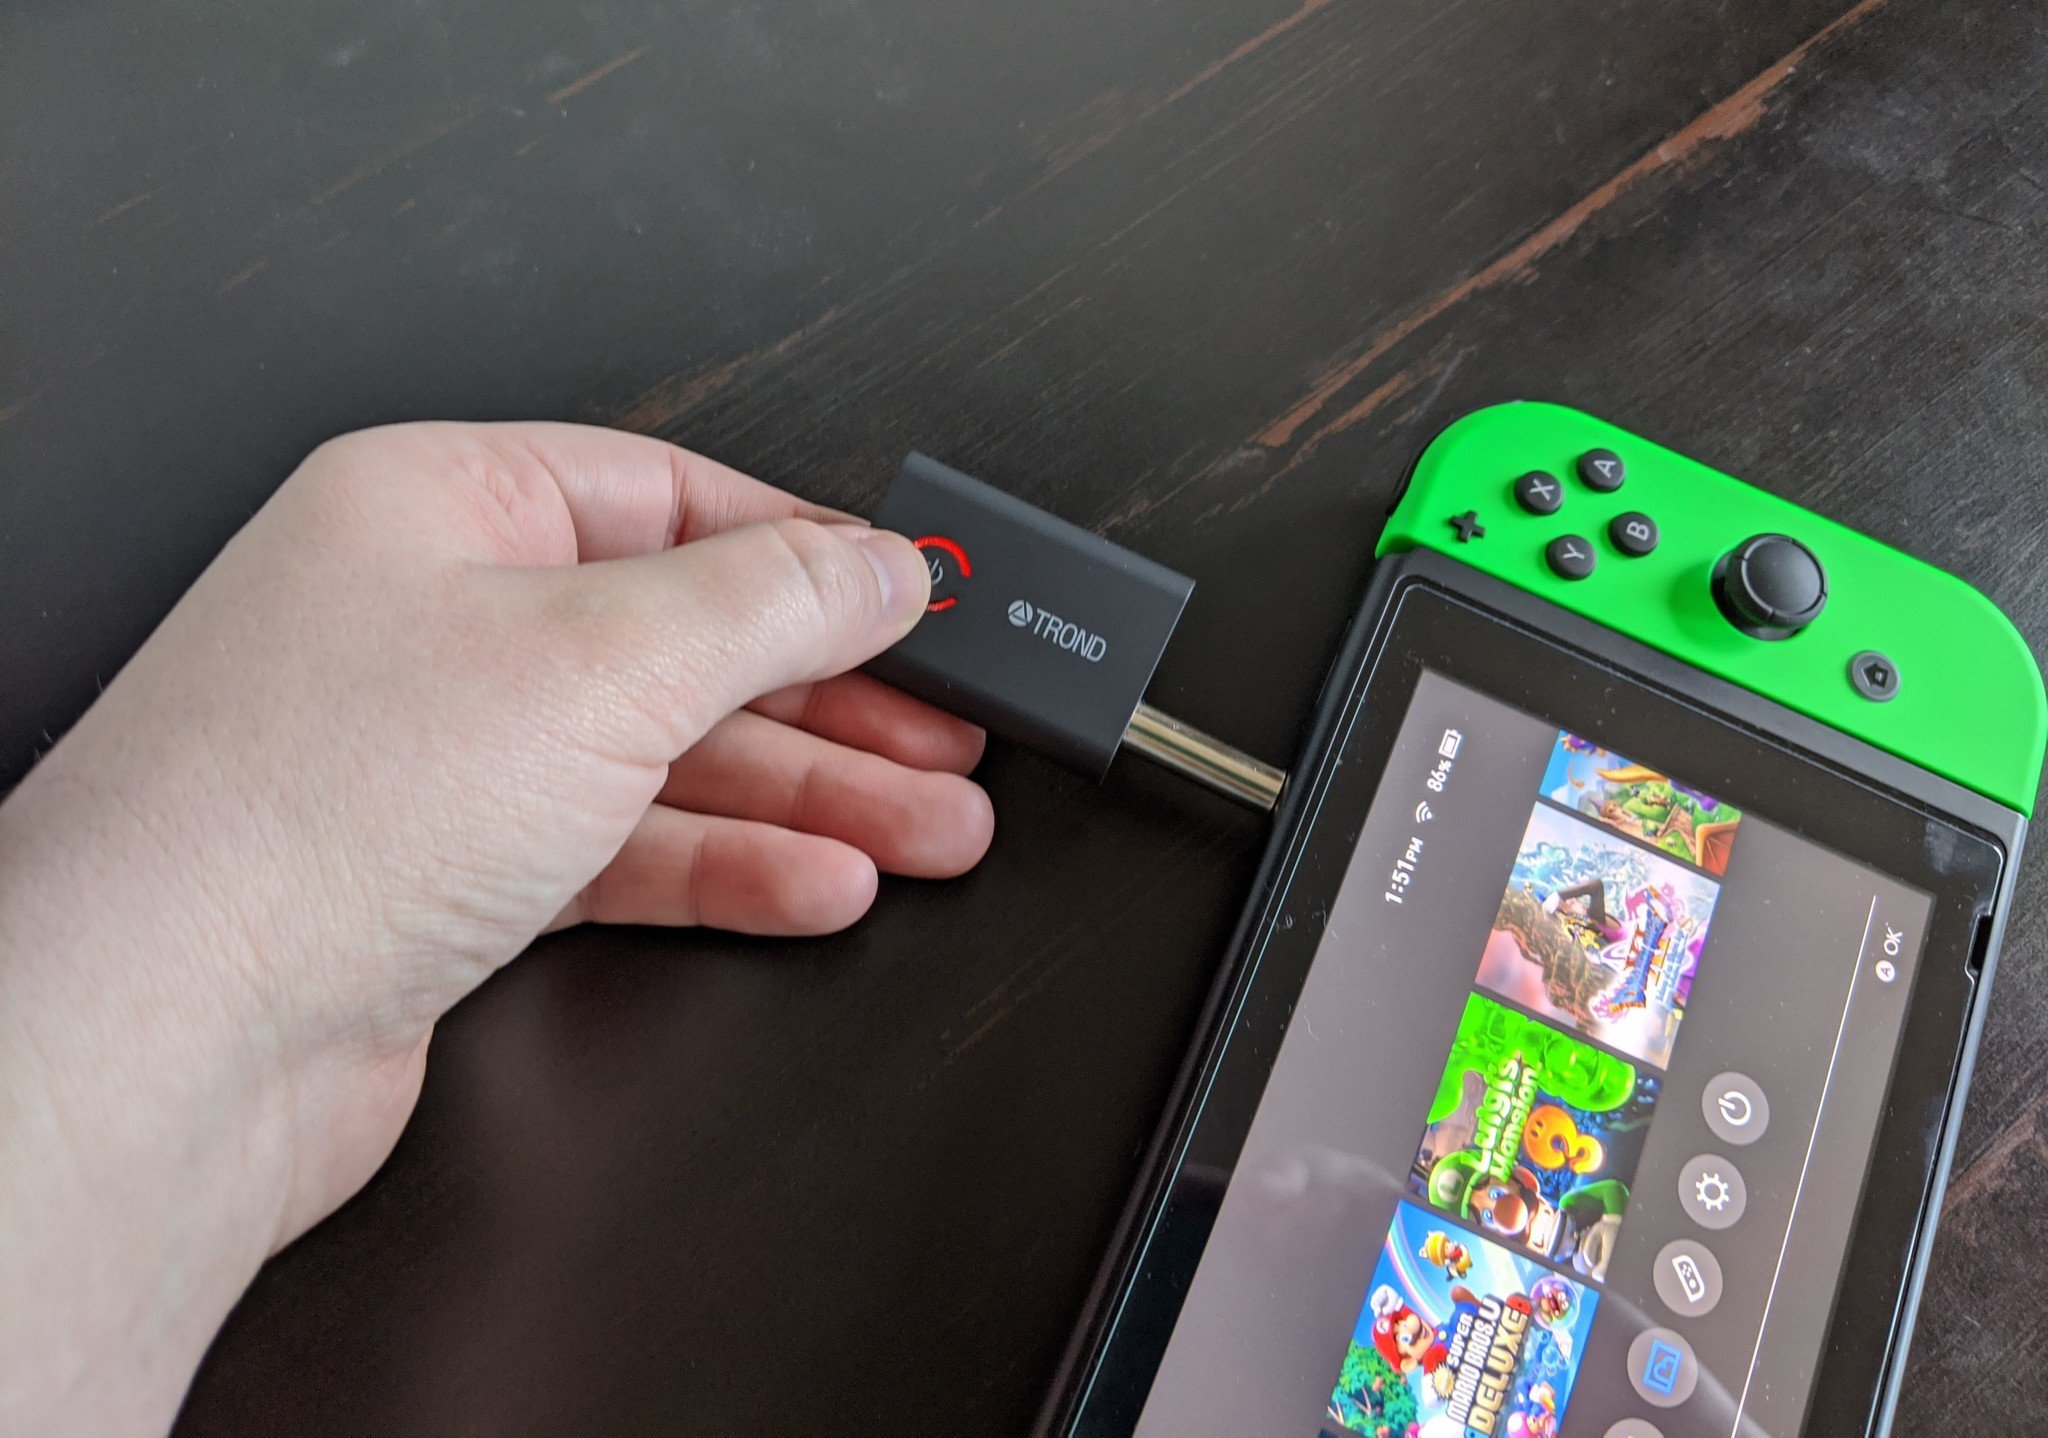 How to use Bluetooth headphones with a Nintendo Switch via the headphone jack: hold down the MFB button for three seconds